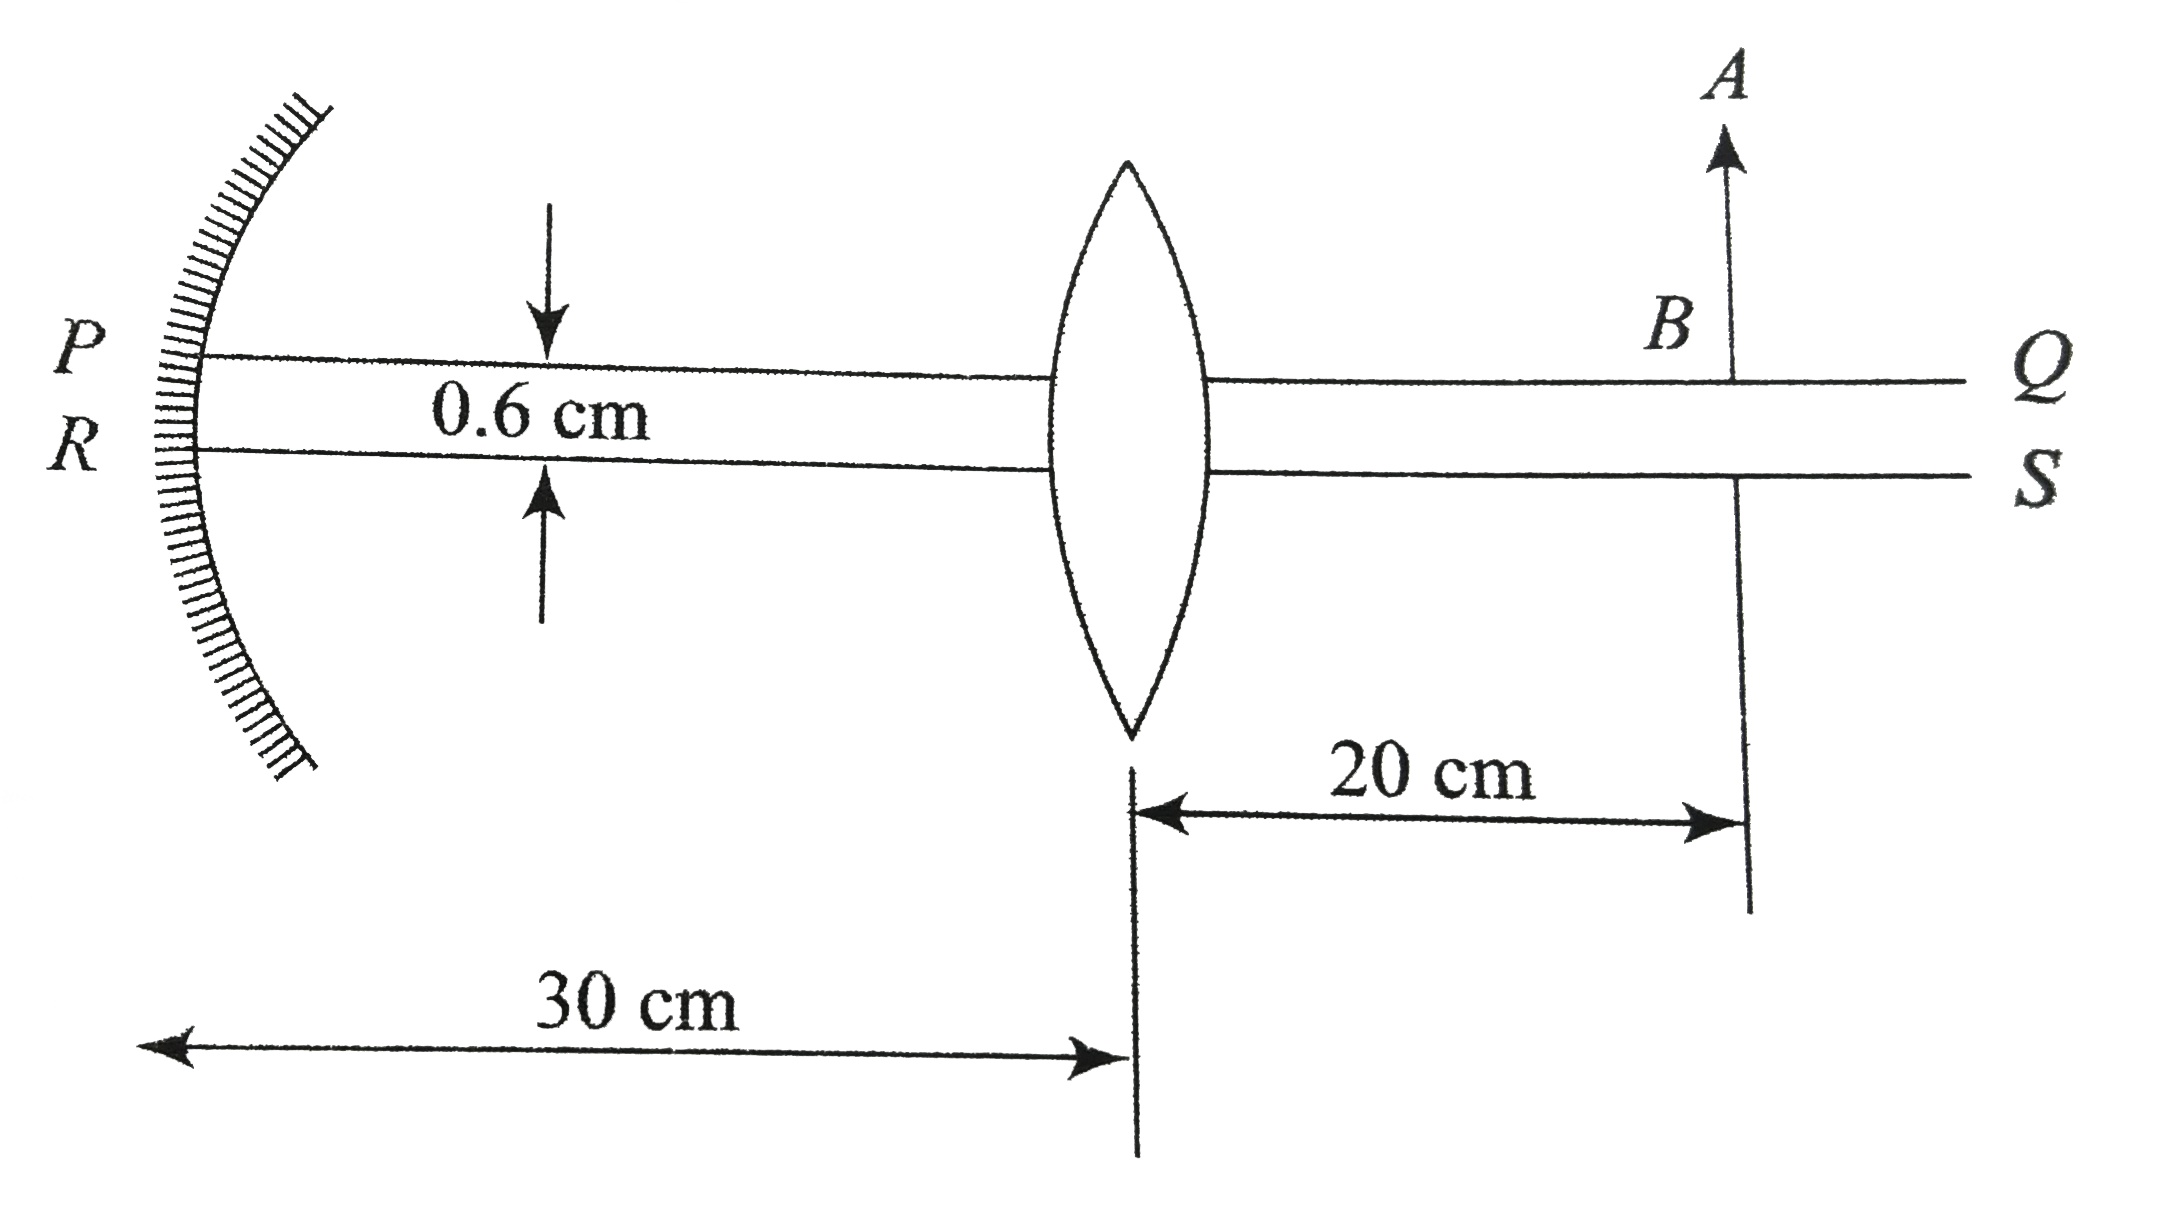 A convex lens of focal length 15cm and a concave mirror of focal length 30cm are kept with their optic axes PQ and RS paralledl but separated in vertical direction by 0.6 cm as shown in Figure. The distance between the lens and mirror is 30cm. An upright object Ab of height 1.2 cm is placed on the optics axis PQ of the lens at a distance of 20 cm from the lens. If A^(')B^(')  is the image after refraction from the lens and reflection from the mirror, find the distance of A^(')B^(') from the pole of the mirror and obtain its magnification. Also, locate positions of A^(')  and B^(') with respect to the optic axis RS.